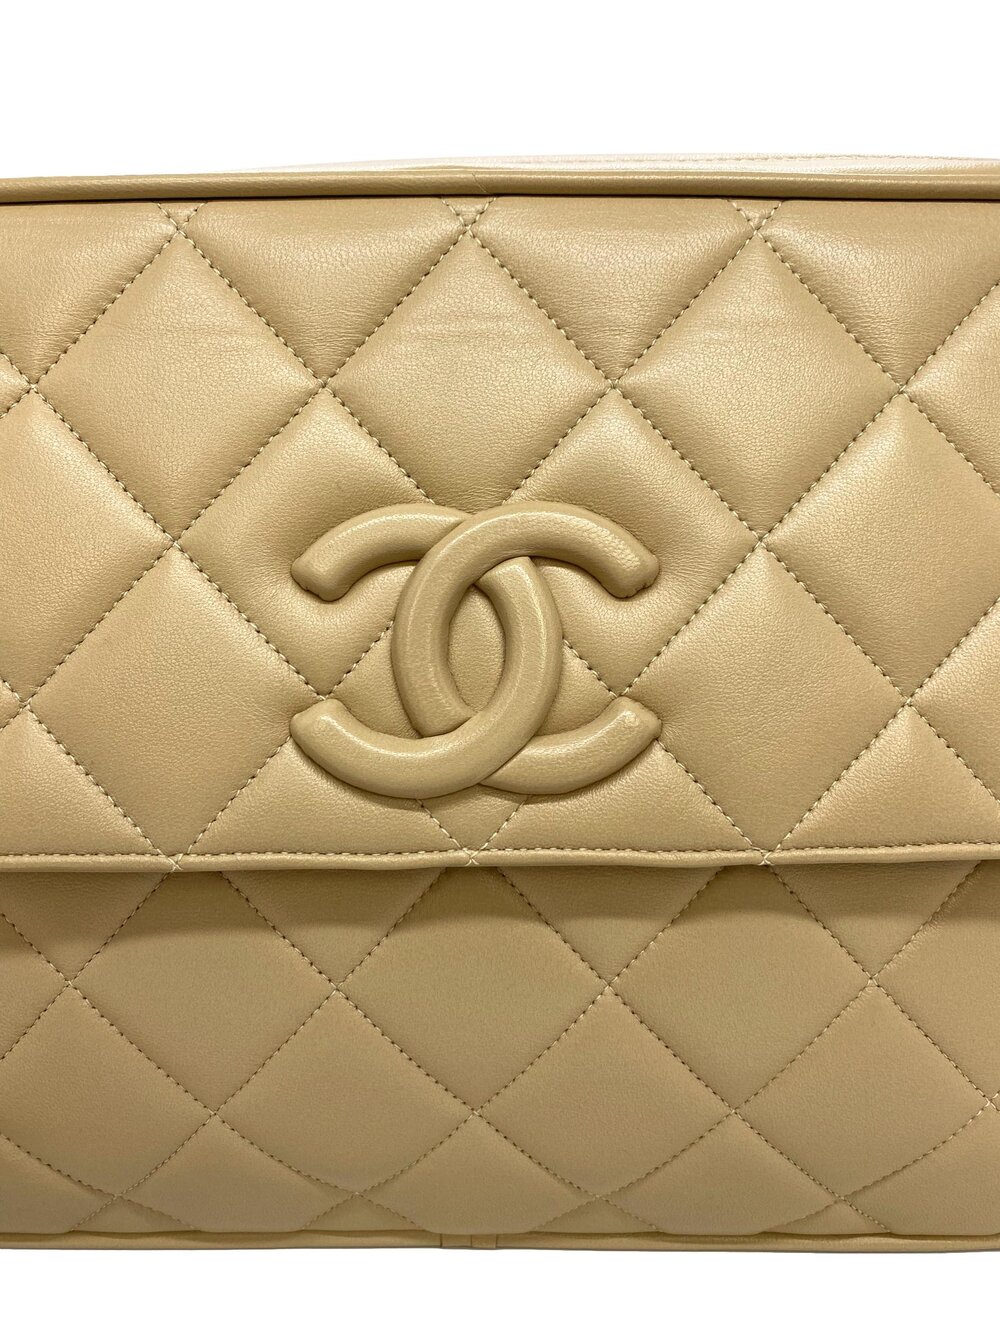 Chanel Gold Chevron Quilted Lambskin Classic Camera Bag